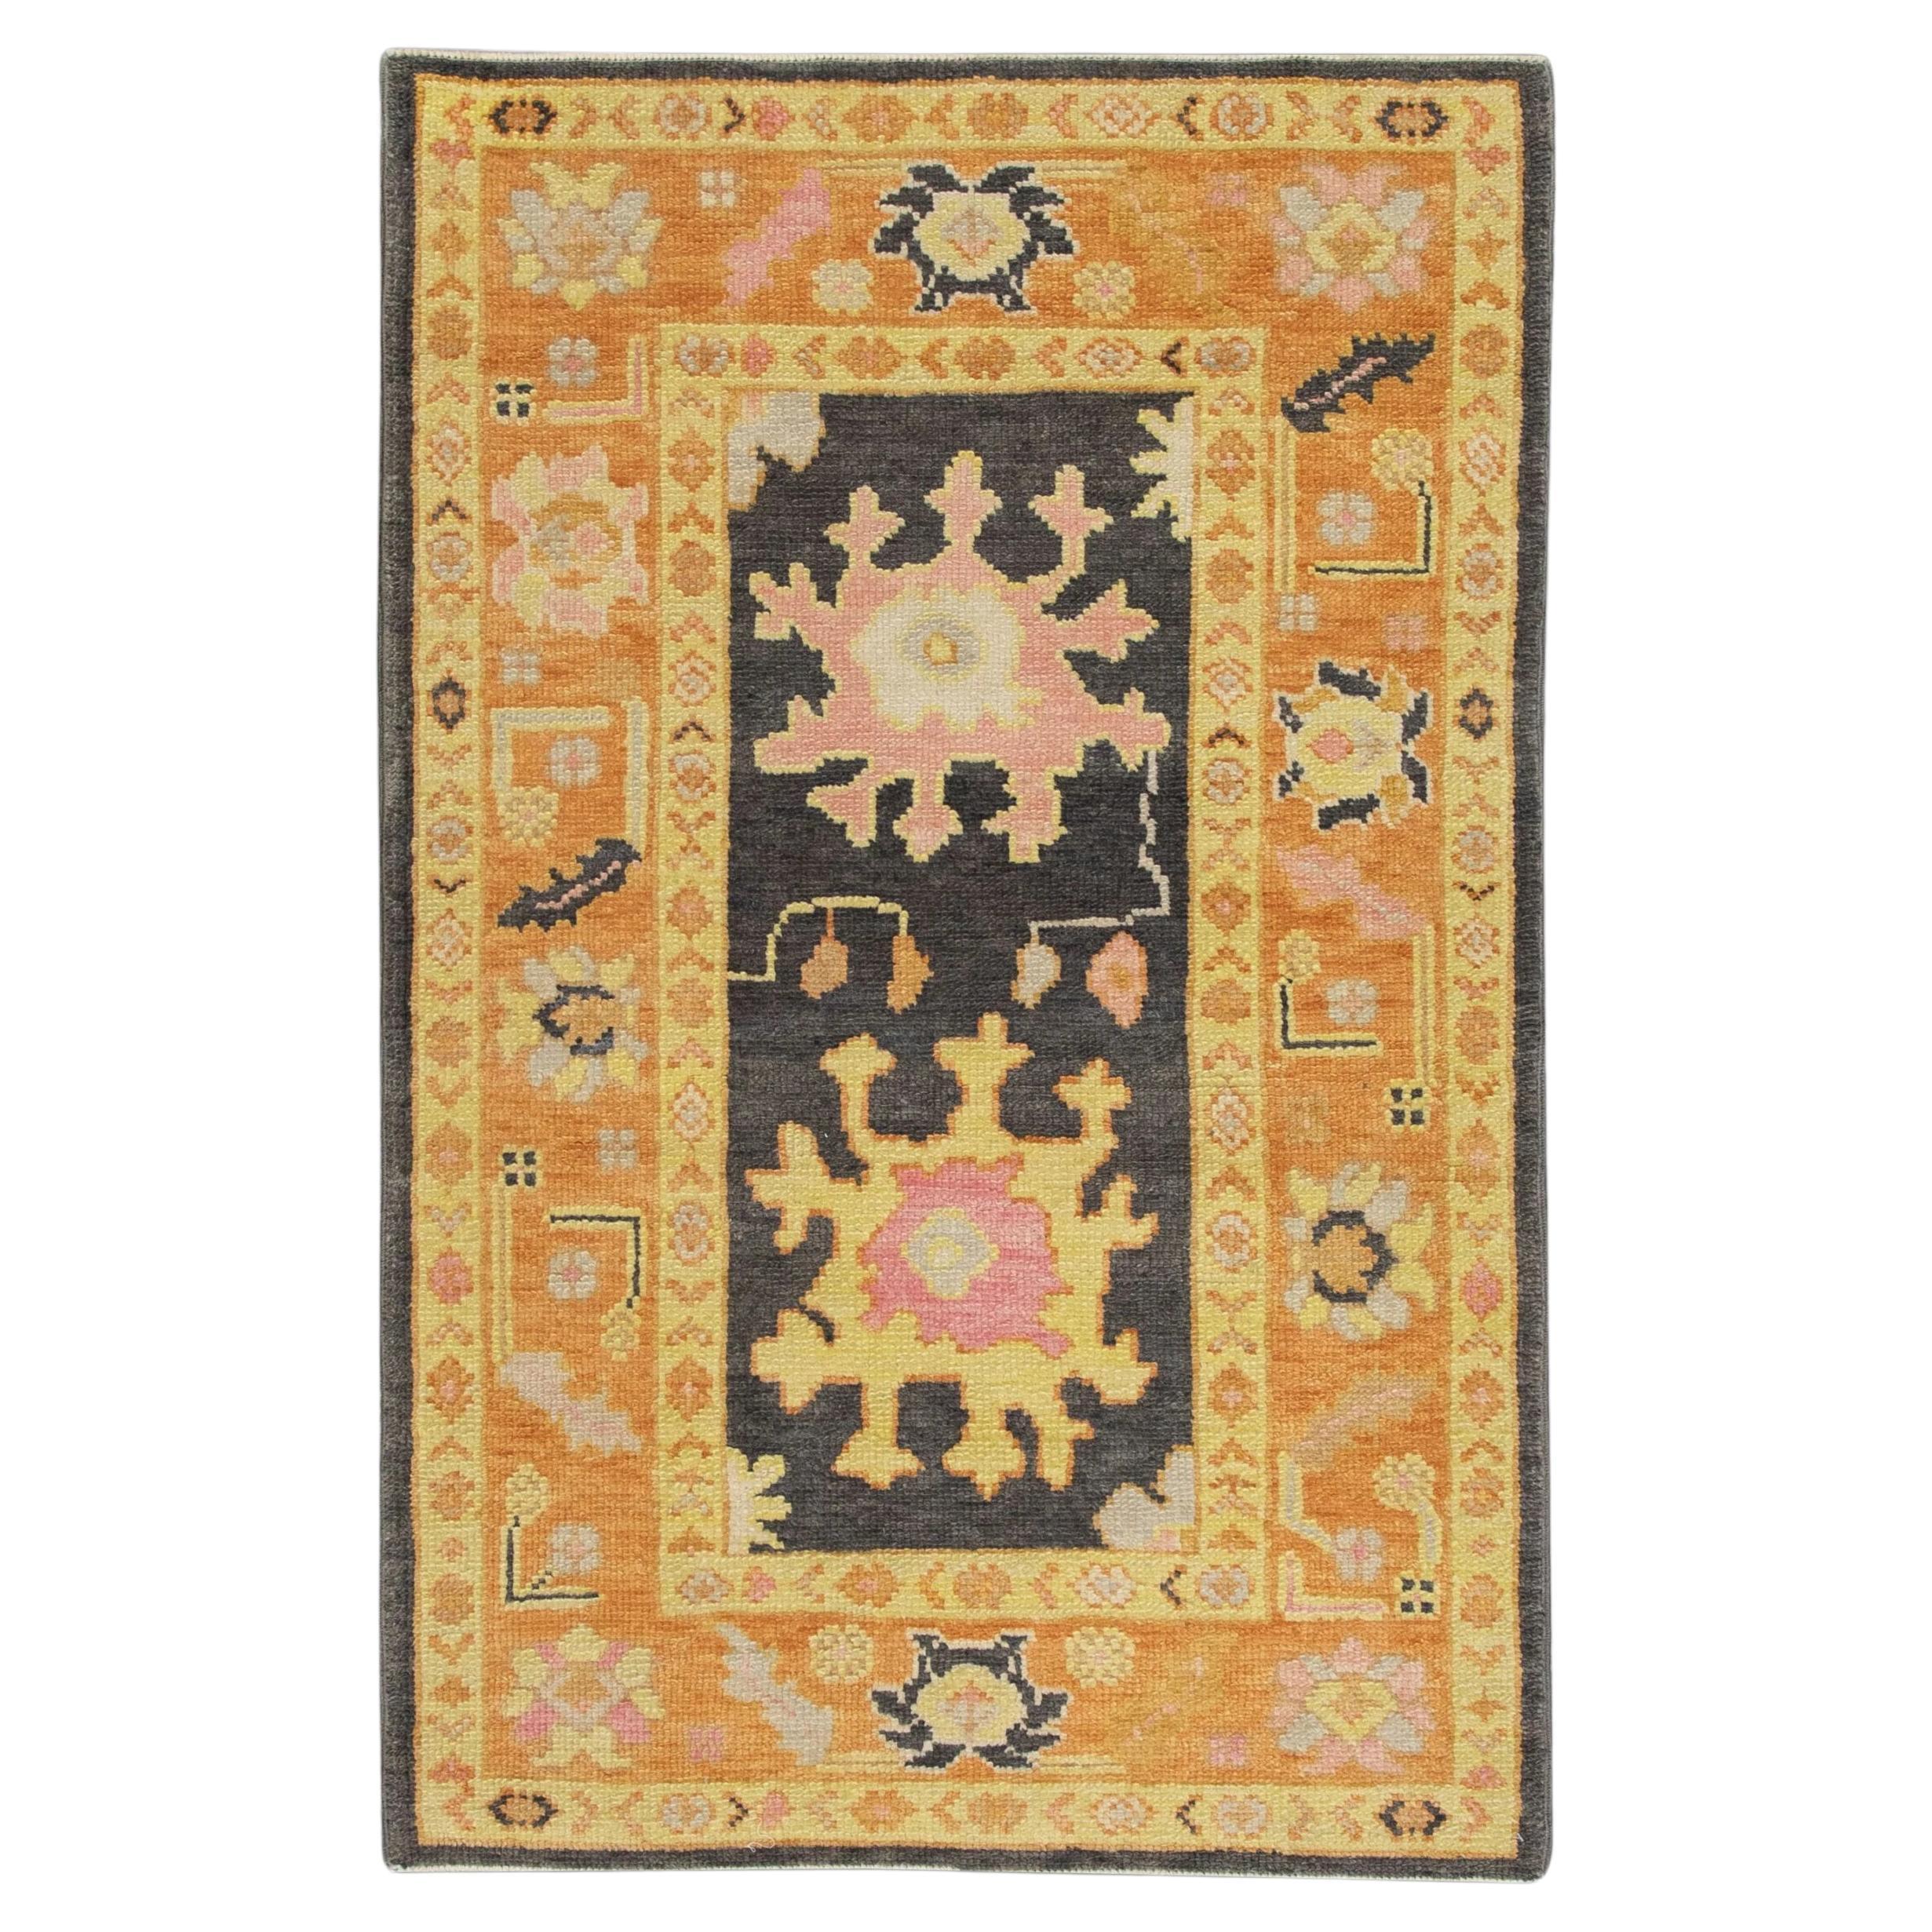 Handwoven Turkish Oushak Rug with Orange and Pink Floral Design 3'1" x 4'8" For Sale